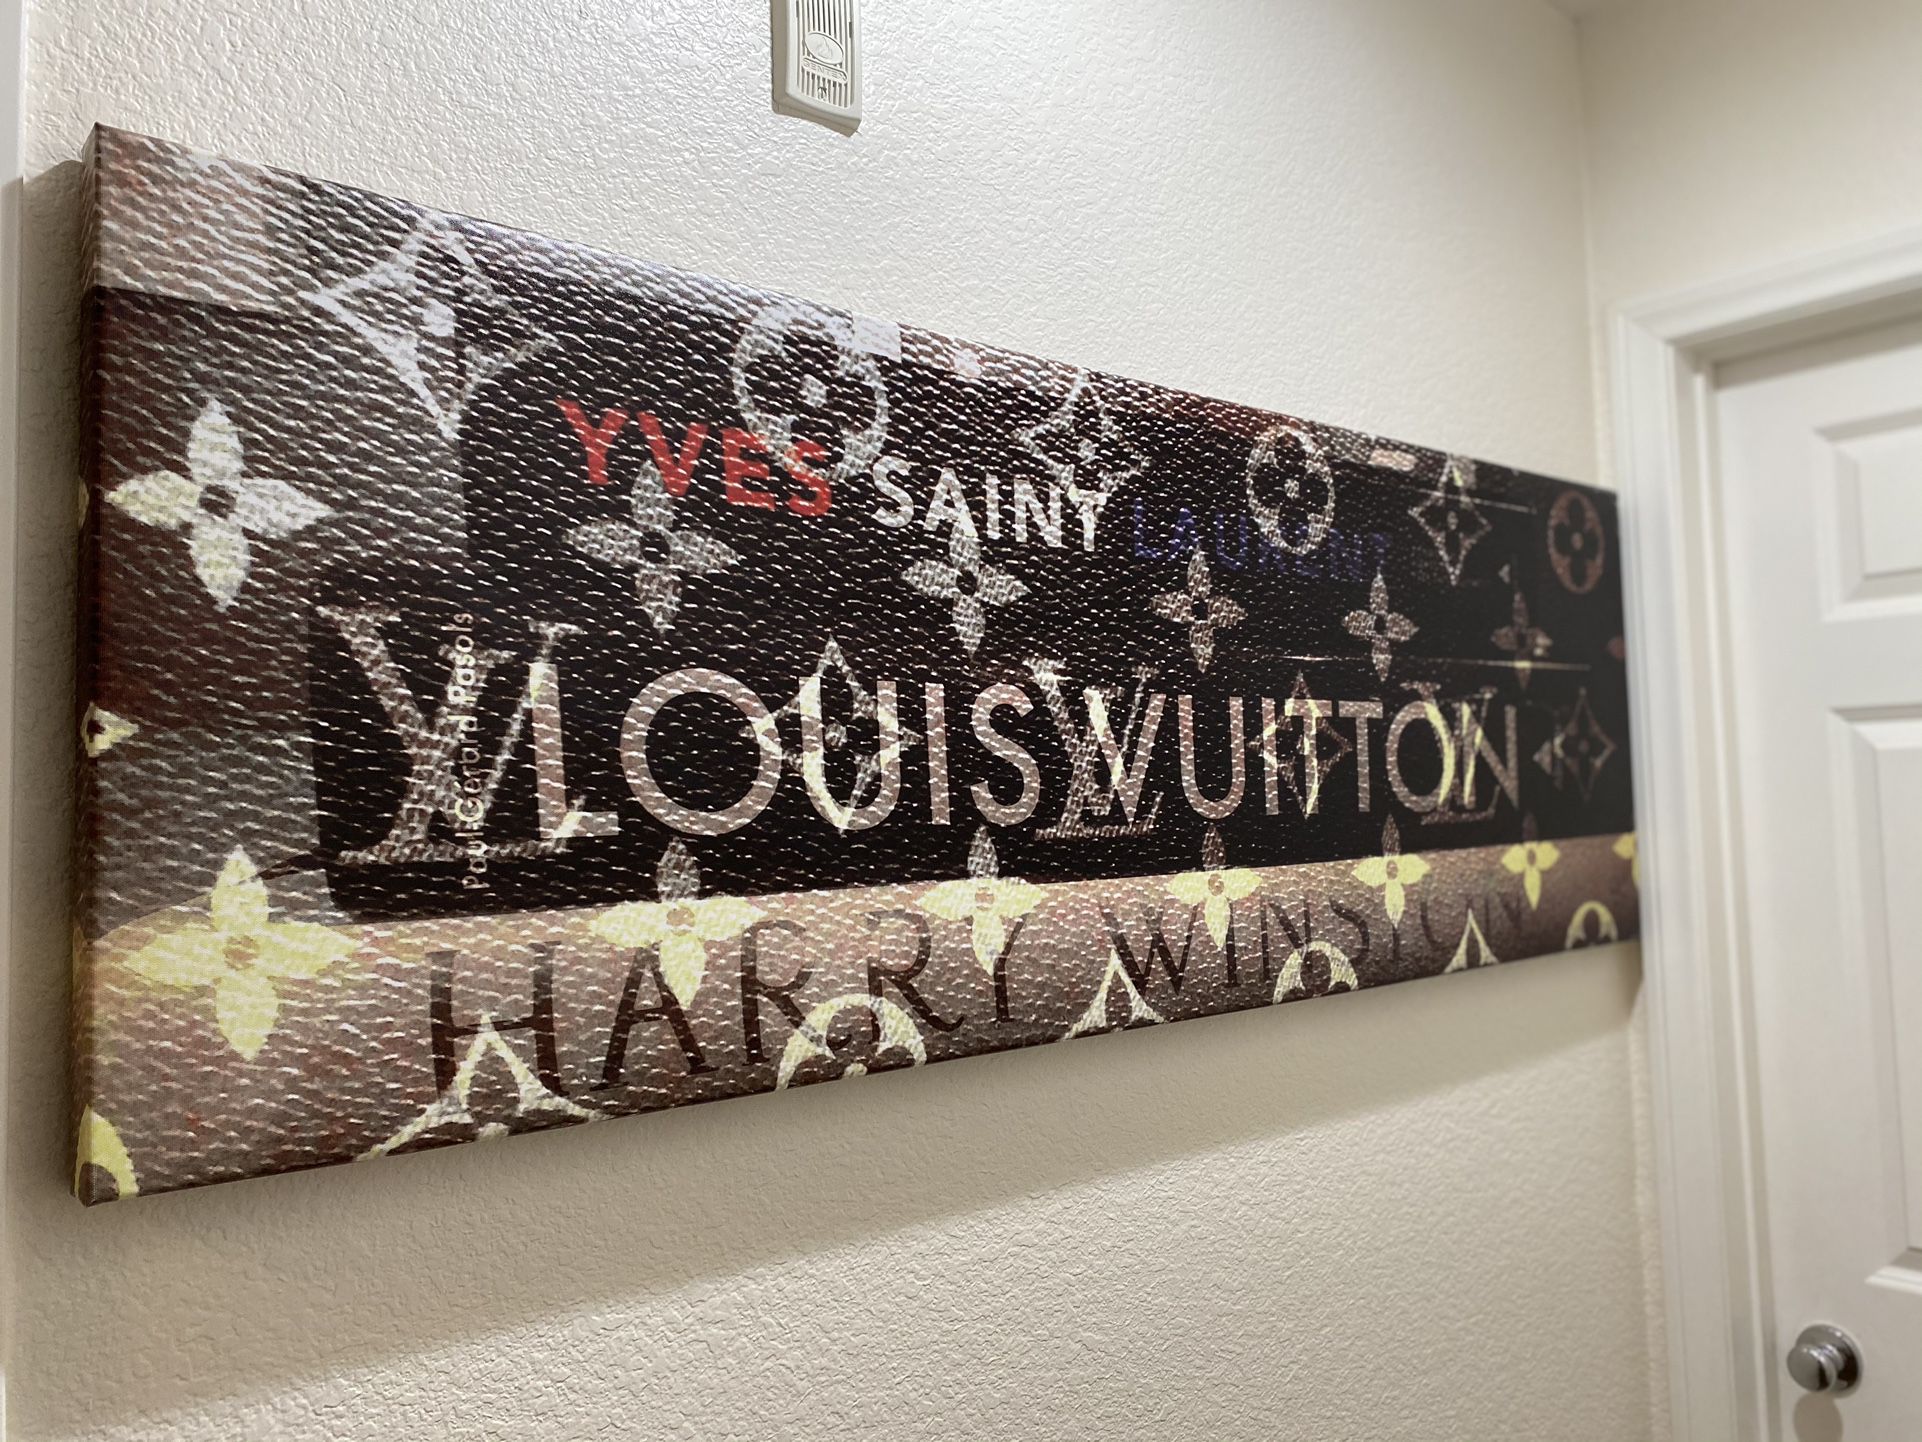 Picture Of Louis Vuitton Colorful Picture Canvas On The Wall